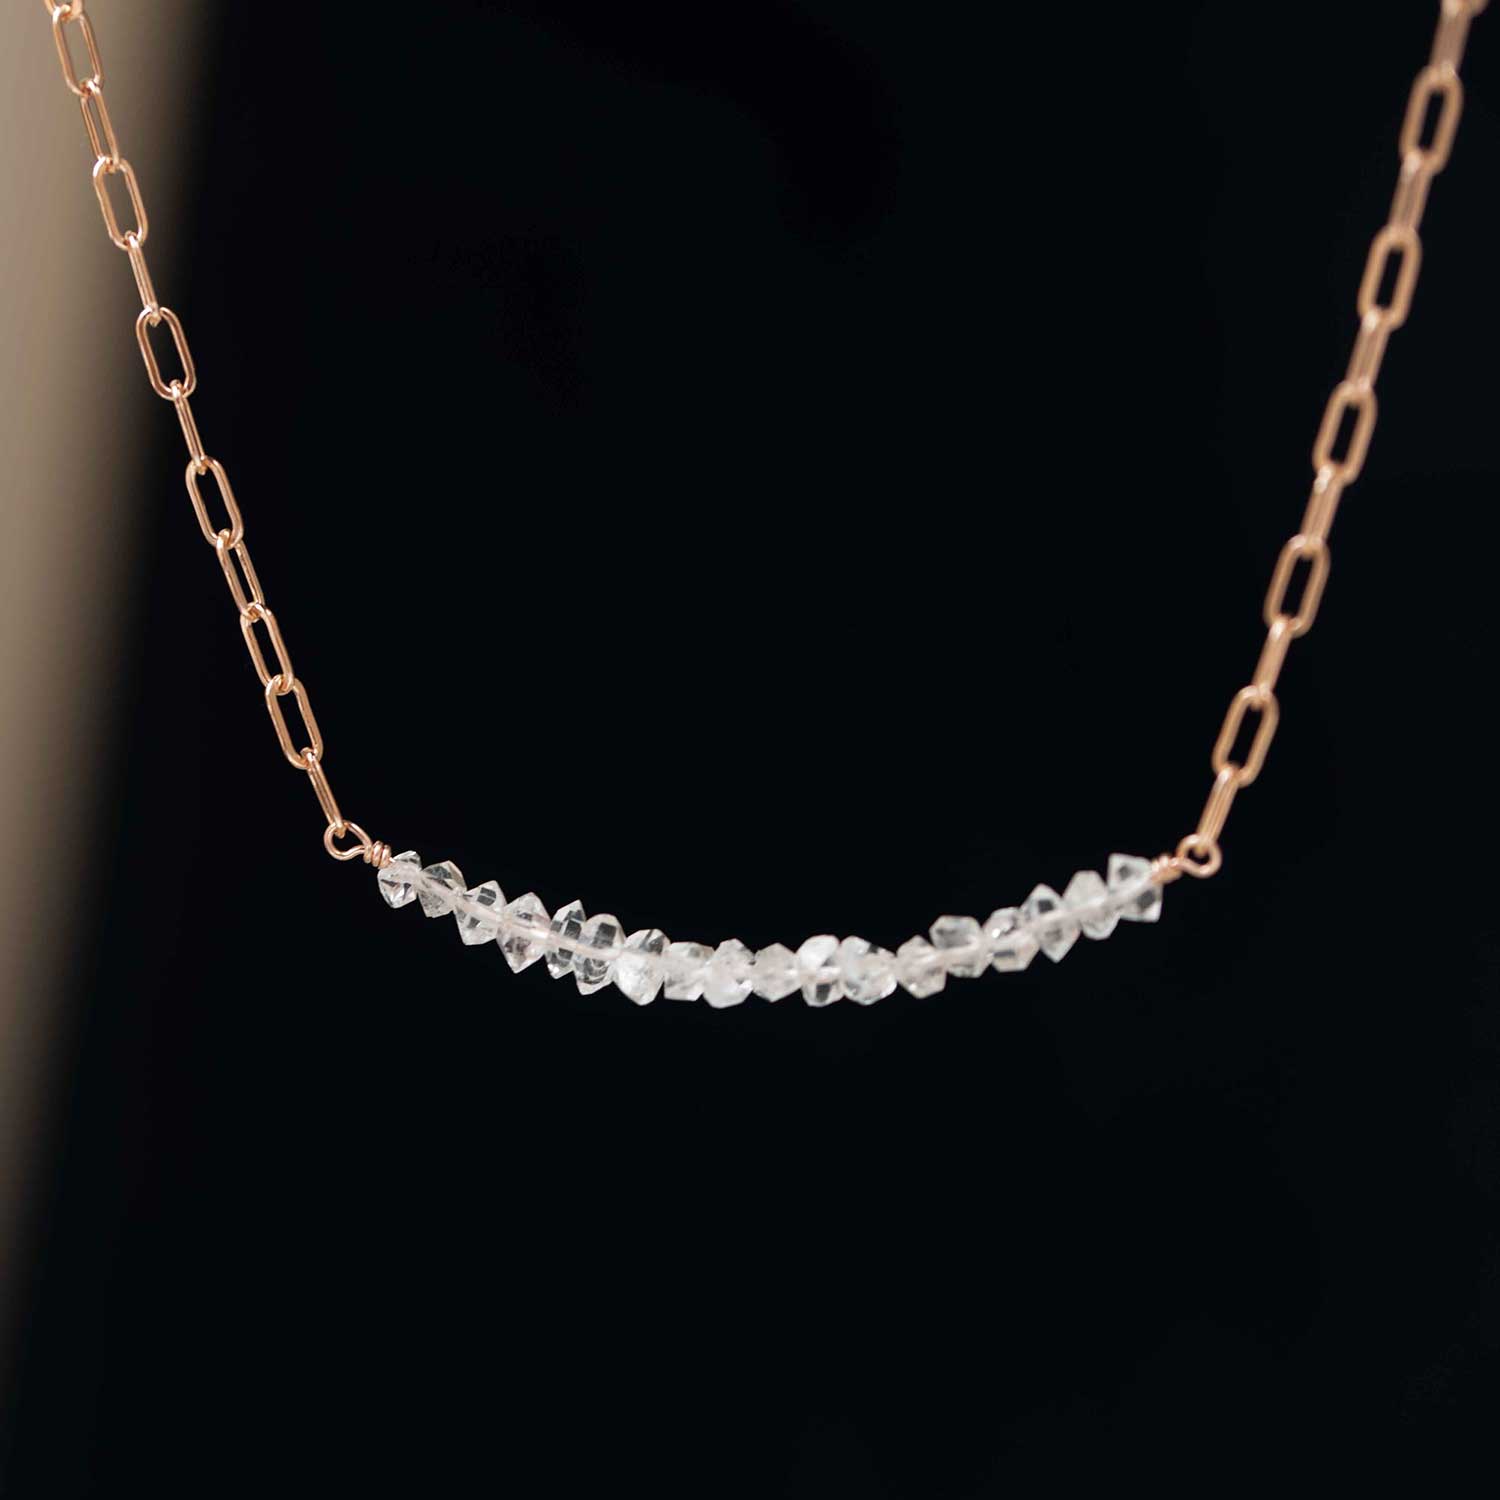 herkimer necklace gold sparkle bridal delicate gifts, raw diamond bridal necklace gifts for women, real herkimer necklace